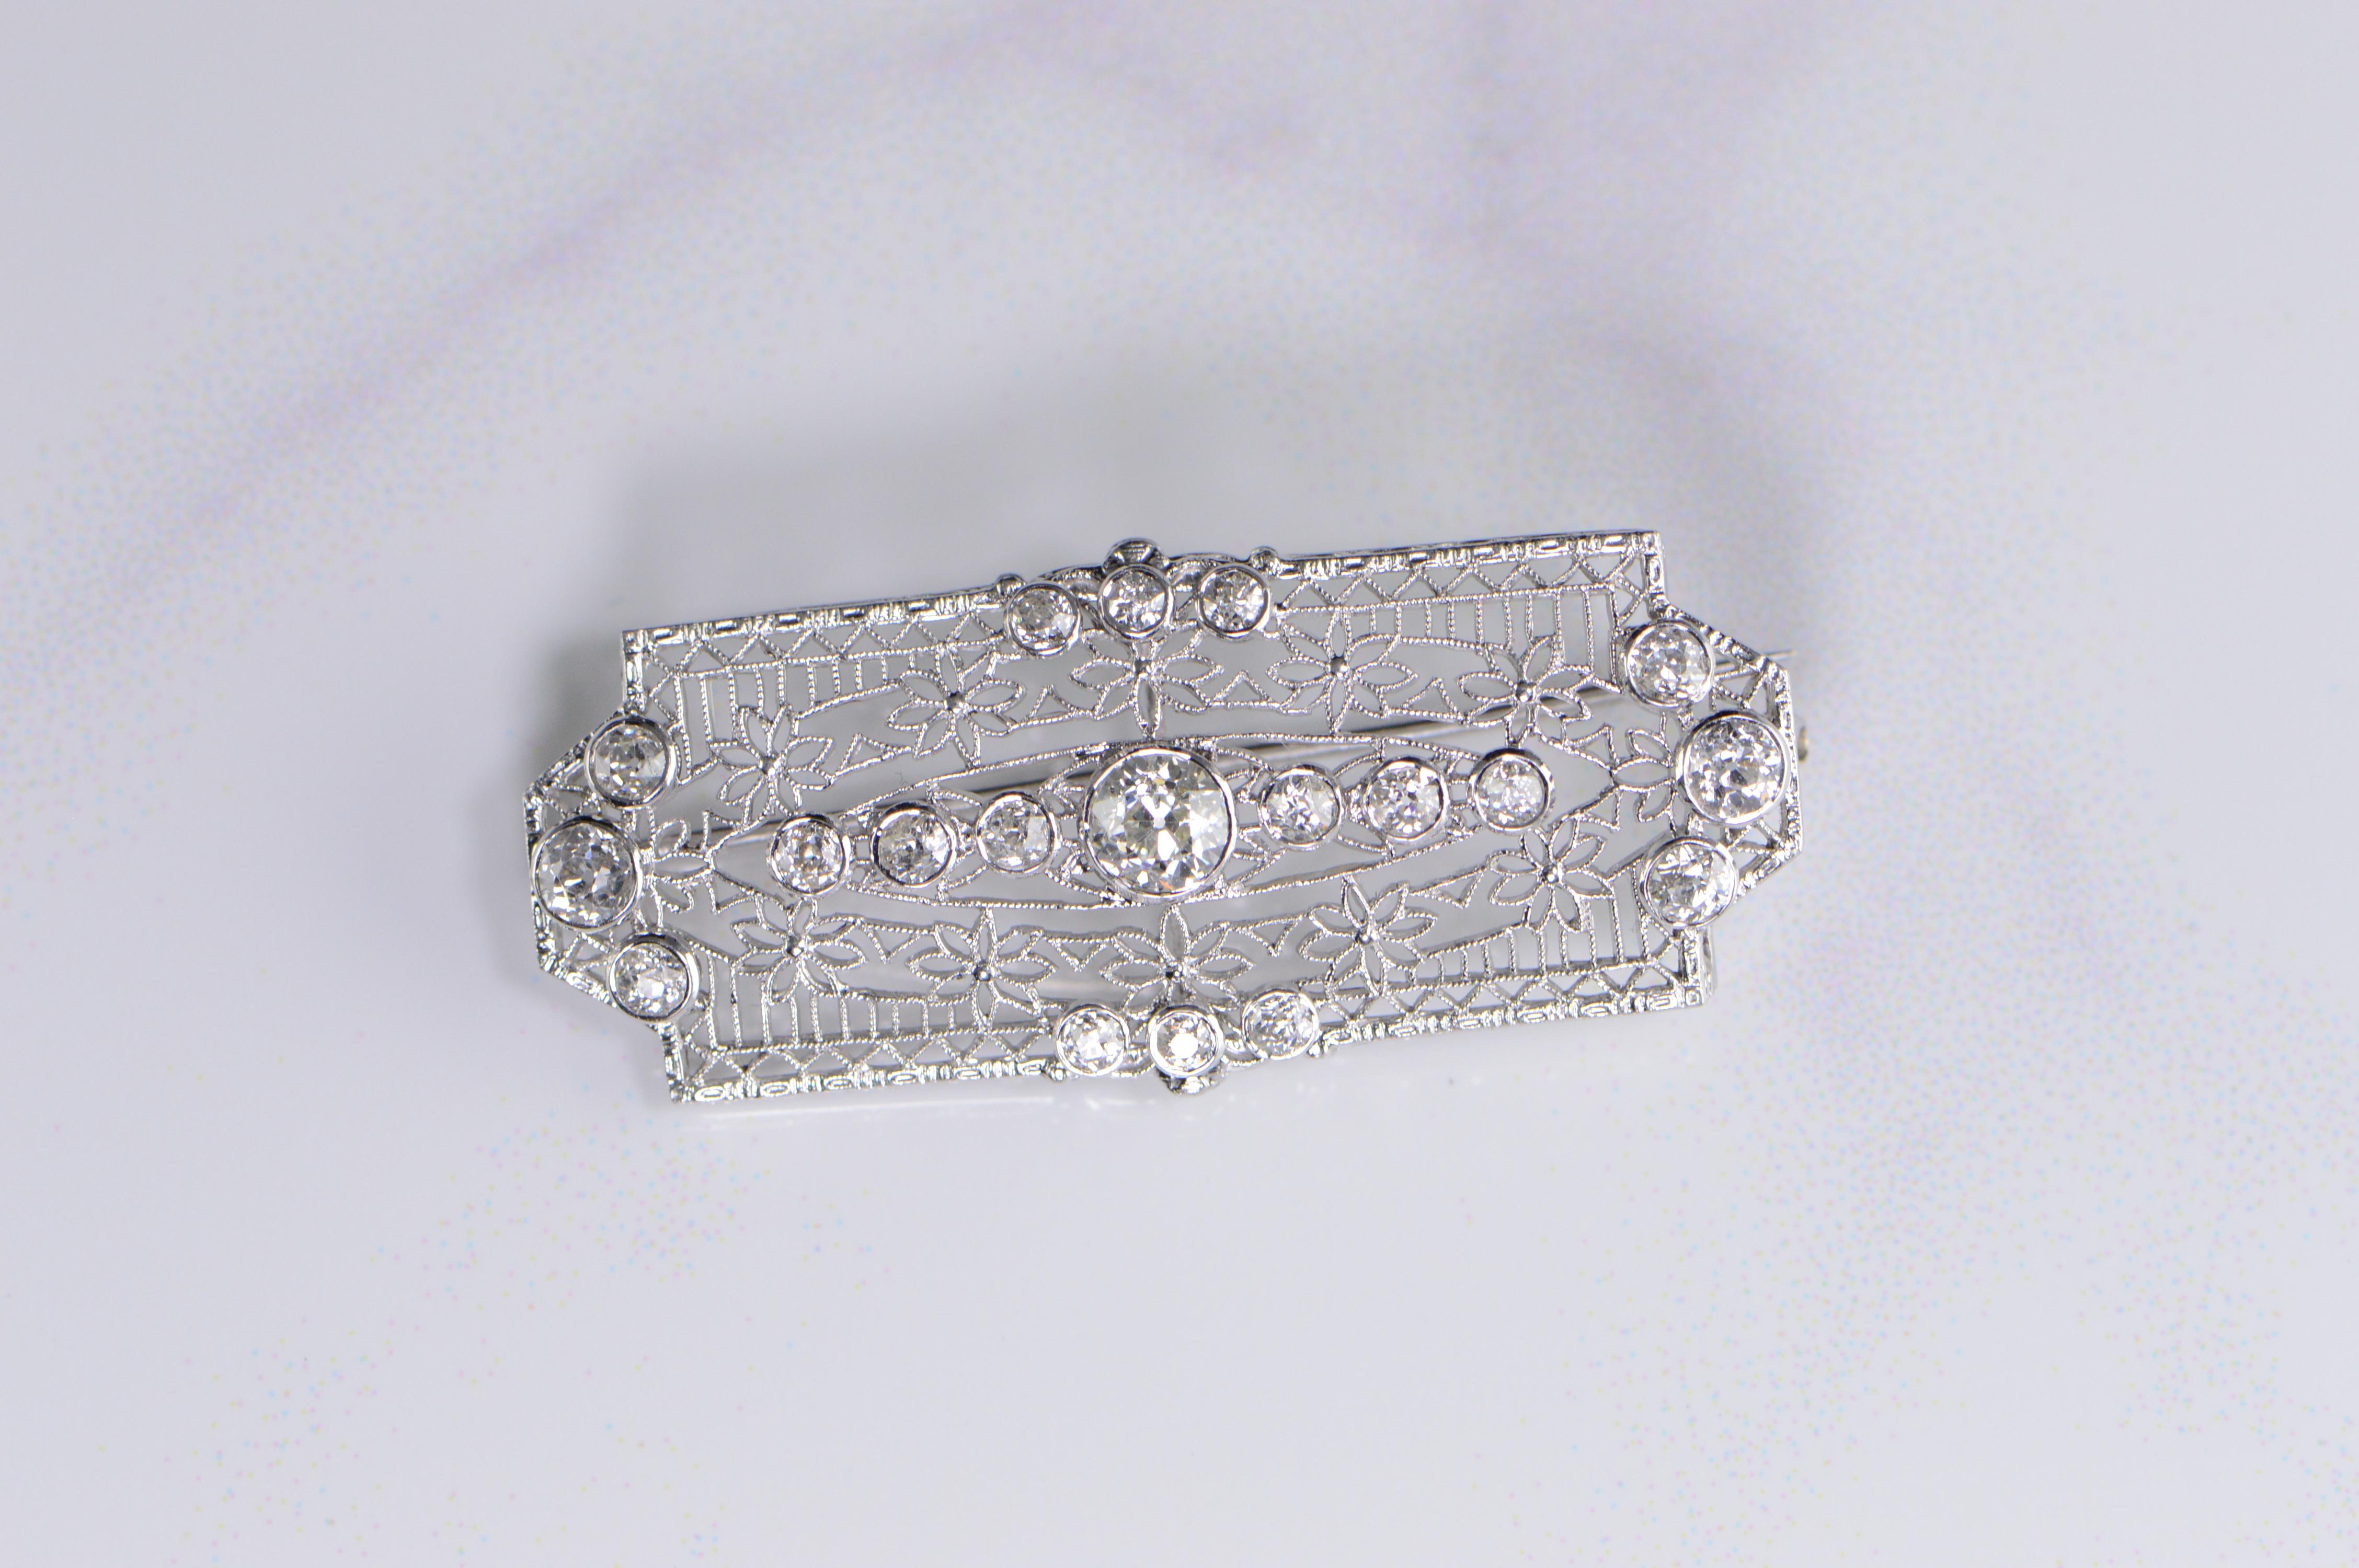 Art Deco Eruopean Cut Diamond Filigree Brooch with 1.68 carat total weight, the center stone is roughly 1/2 carat. Very few inclusions crafted in 14k white gold from the 1920's-1930's weighing 5.2 grams total 